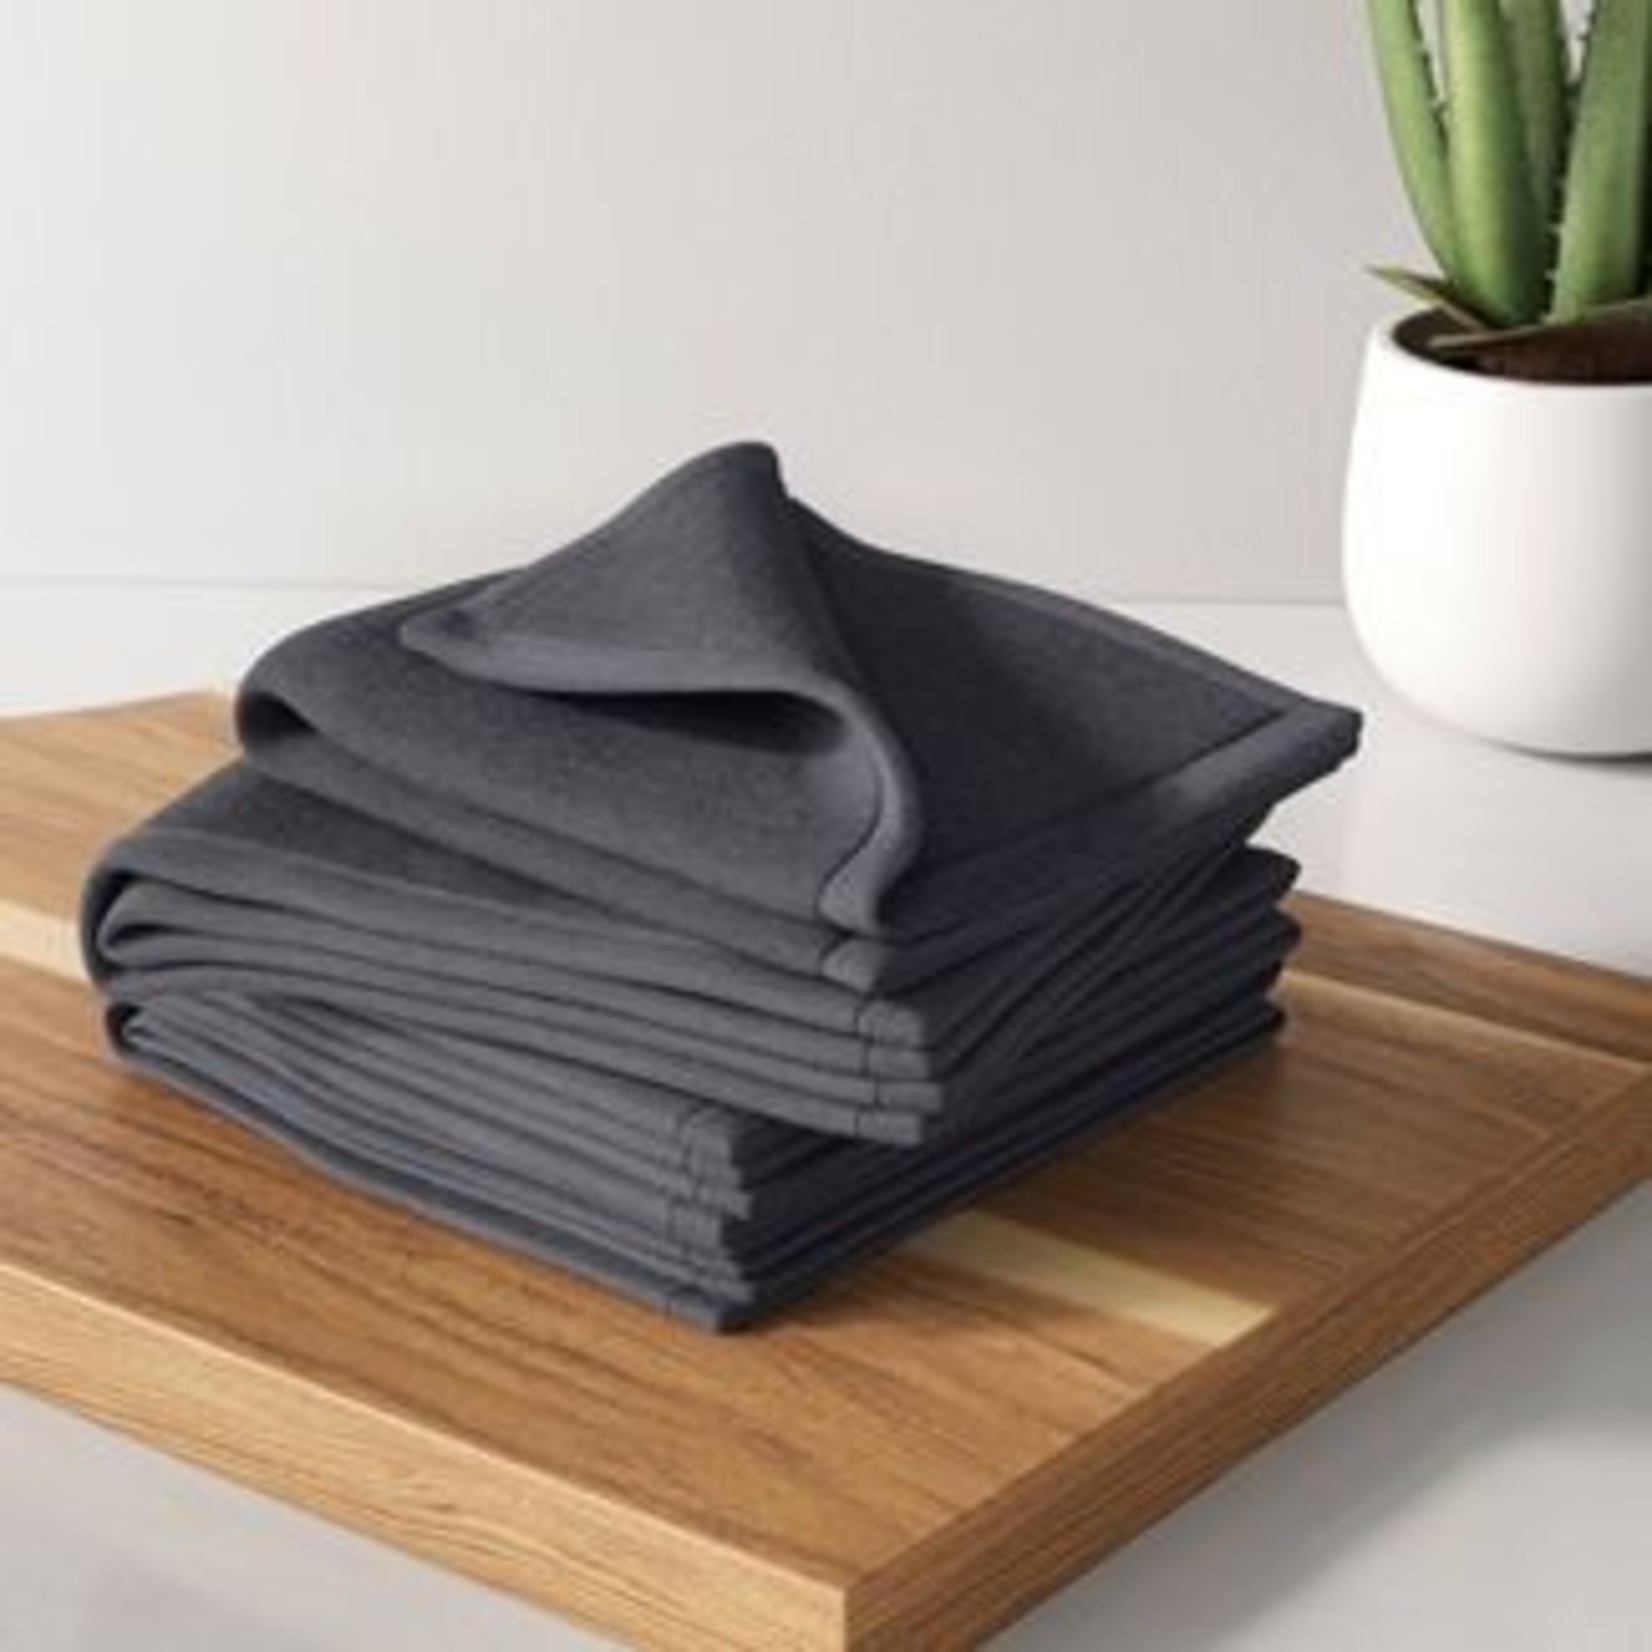 Made By Design Cotton Barmops Gray Kitchen Towels - 4 Pack